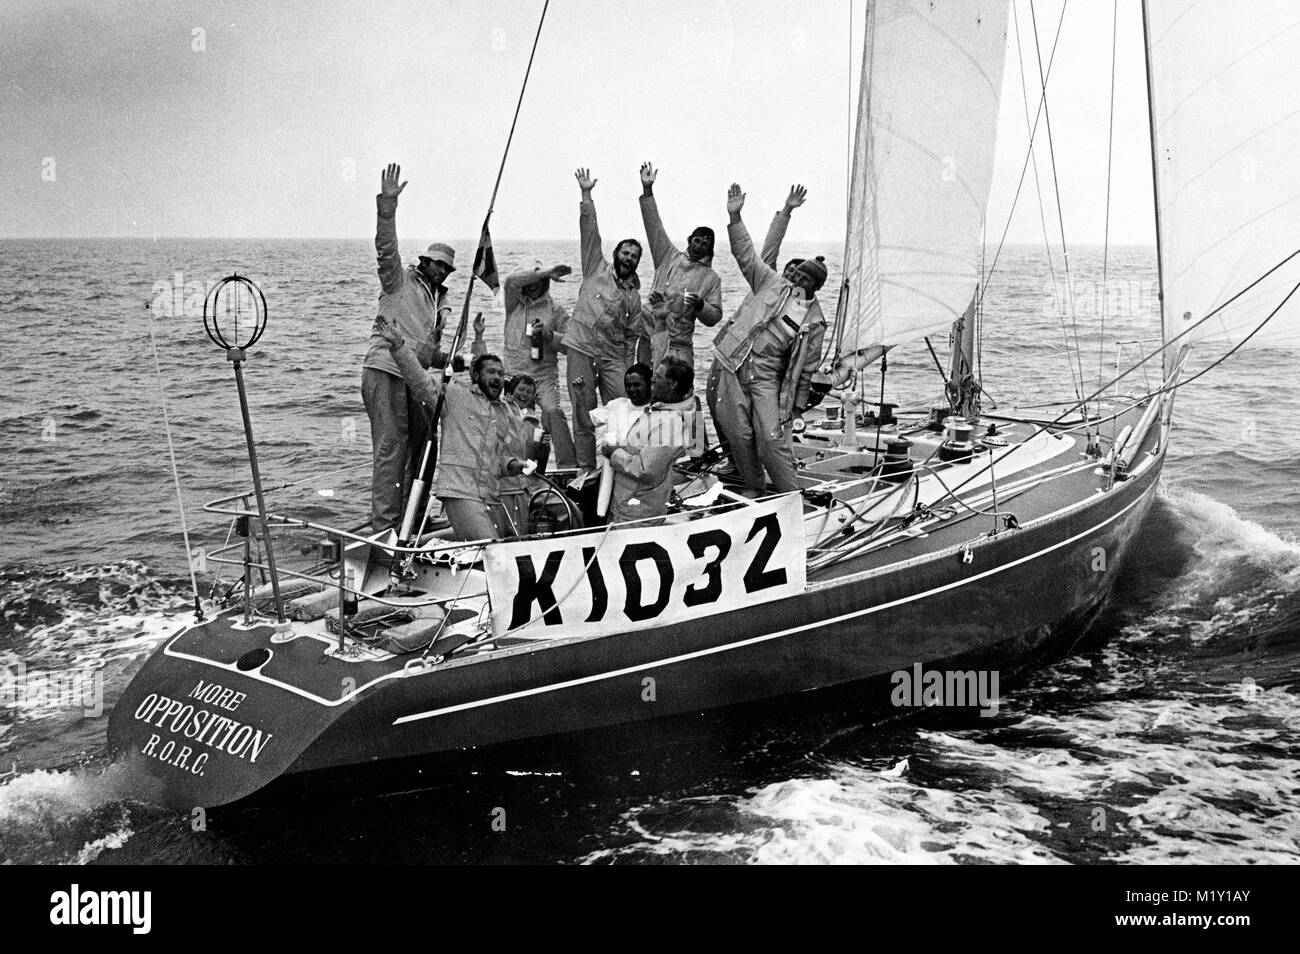 AJAXNETPHOTO. 1976. PORTSMOUTH, Angleterre. Location - TRAVERSE - FINITION PLUS D'OPPOSITION. SKIPPER:ROBIN KNOX JOHNSTON. PHOTO:JONATHAN EASTLAND/AJAX Banque D'Images